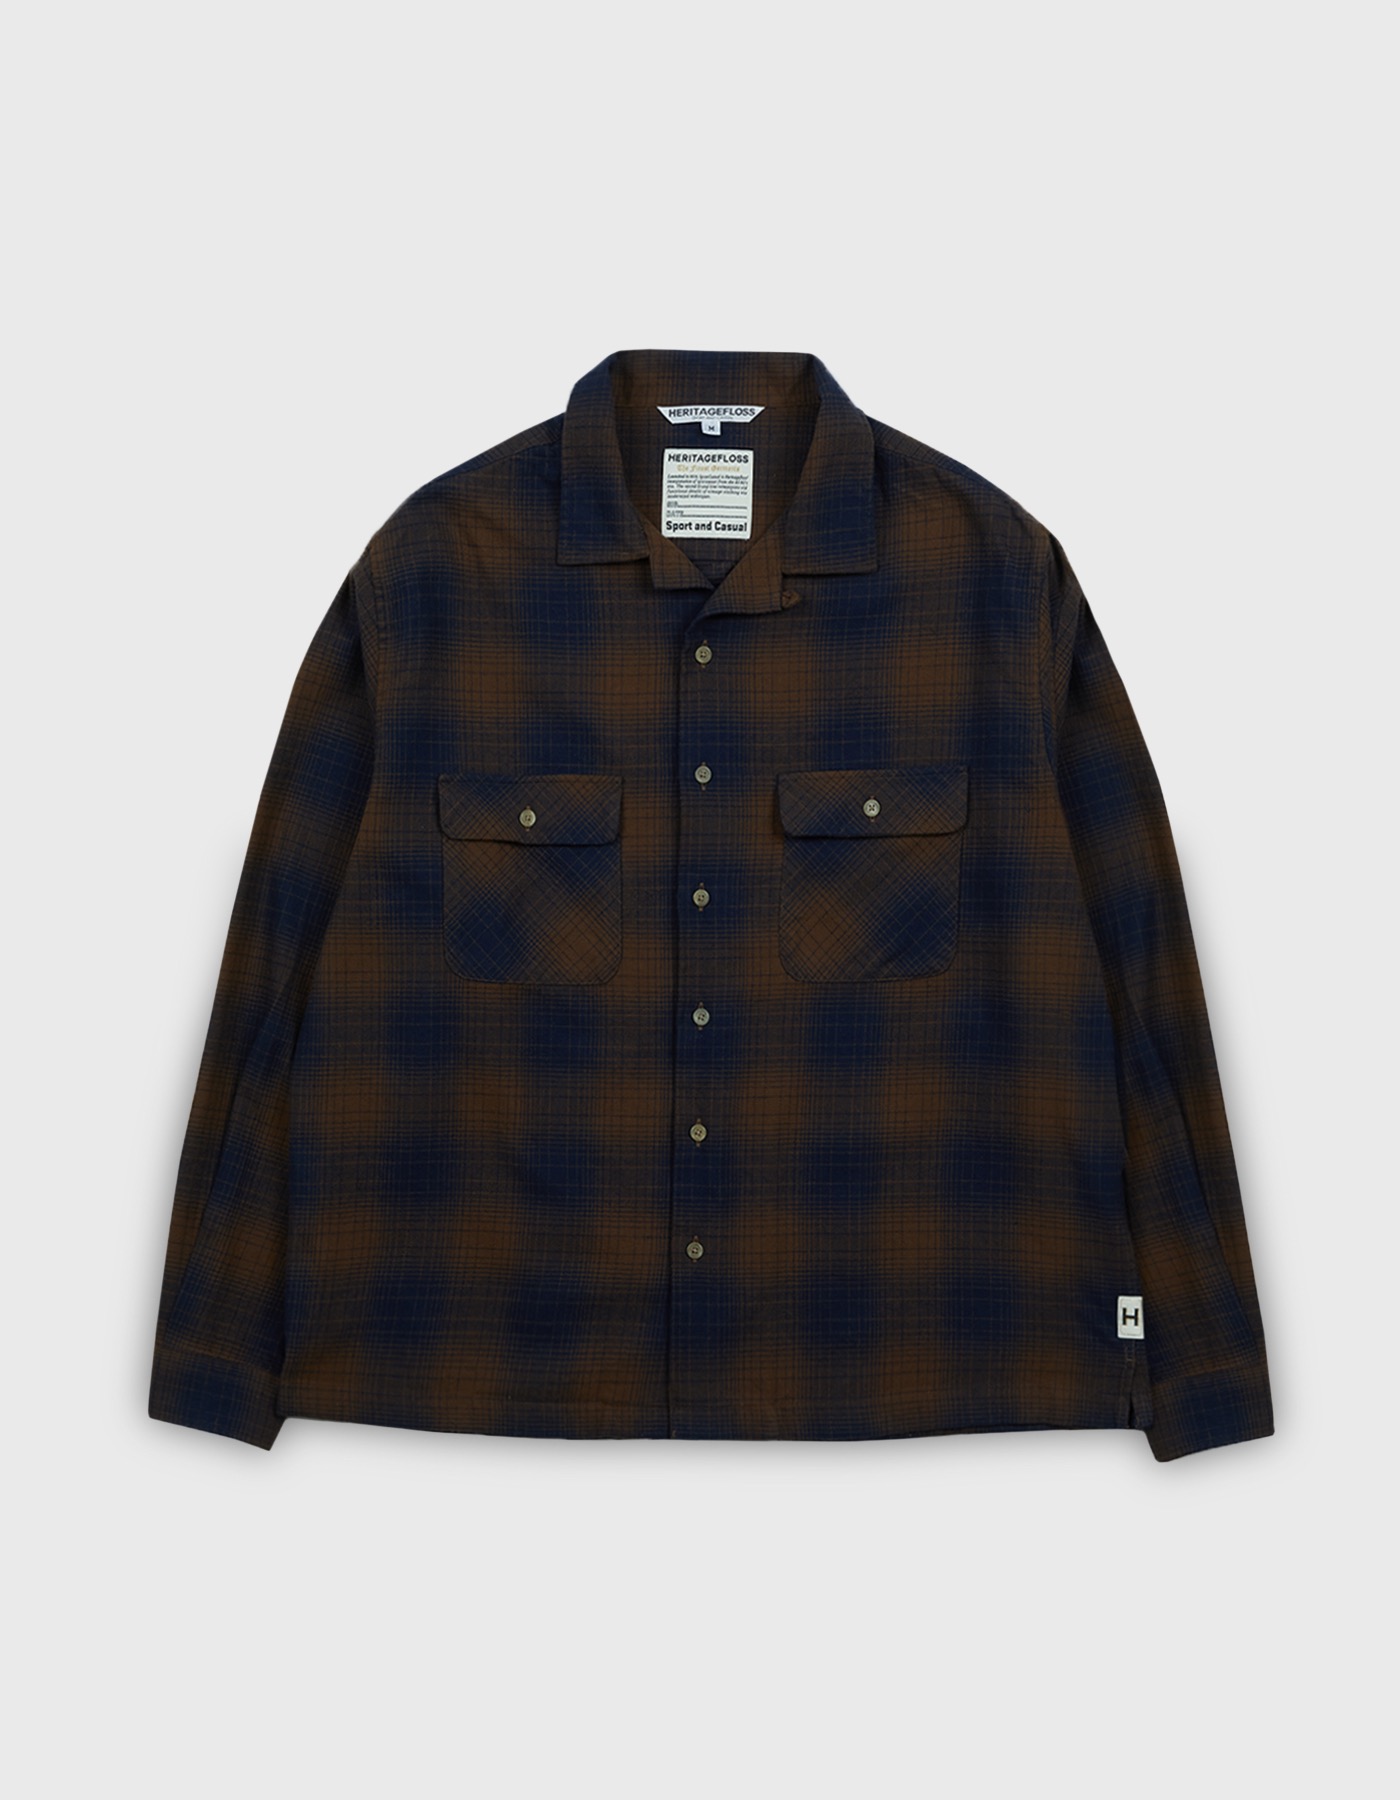 ONE WASHED PLAID SHIRT / Brown-Navy